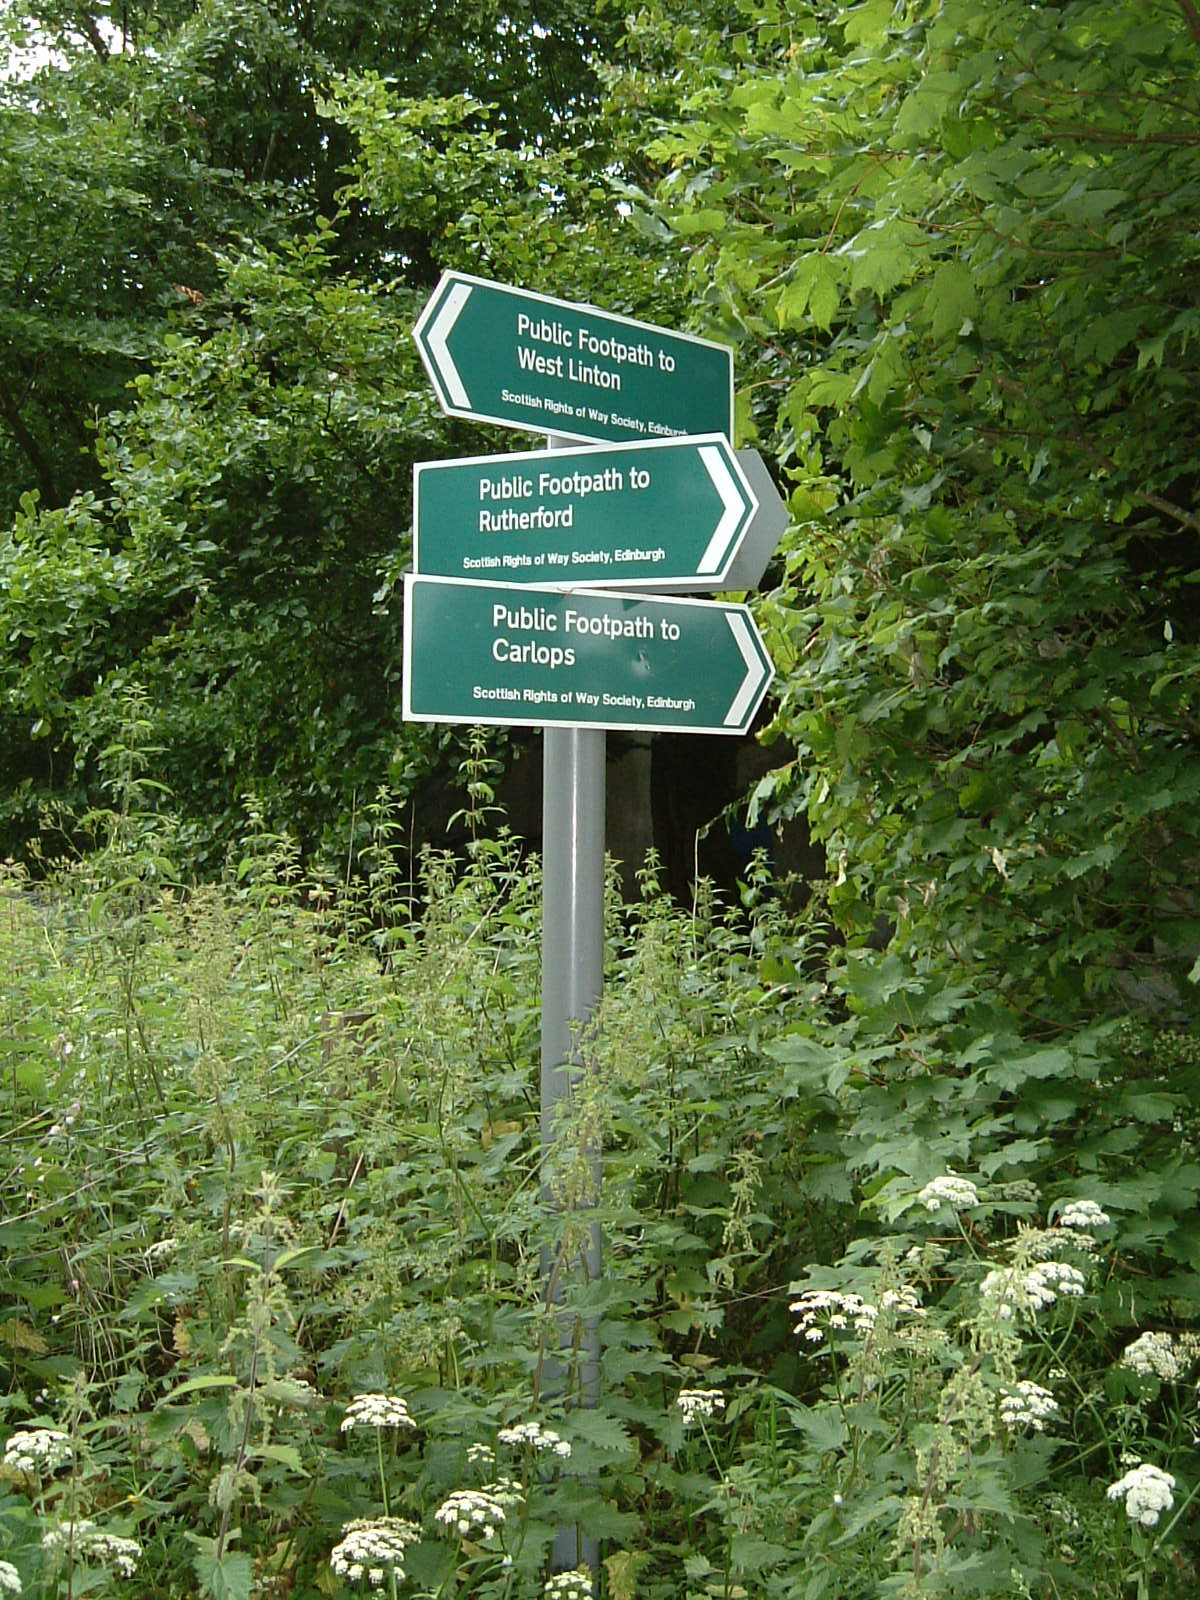 A Scottish right of way sign